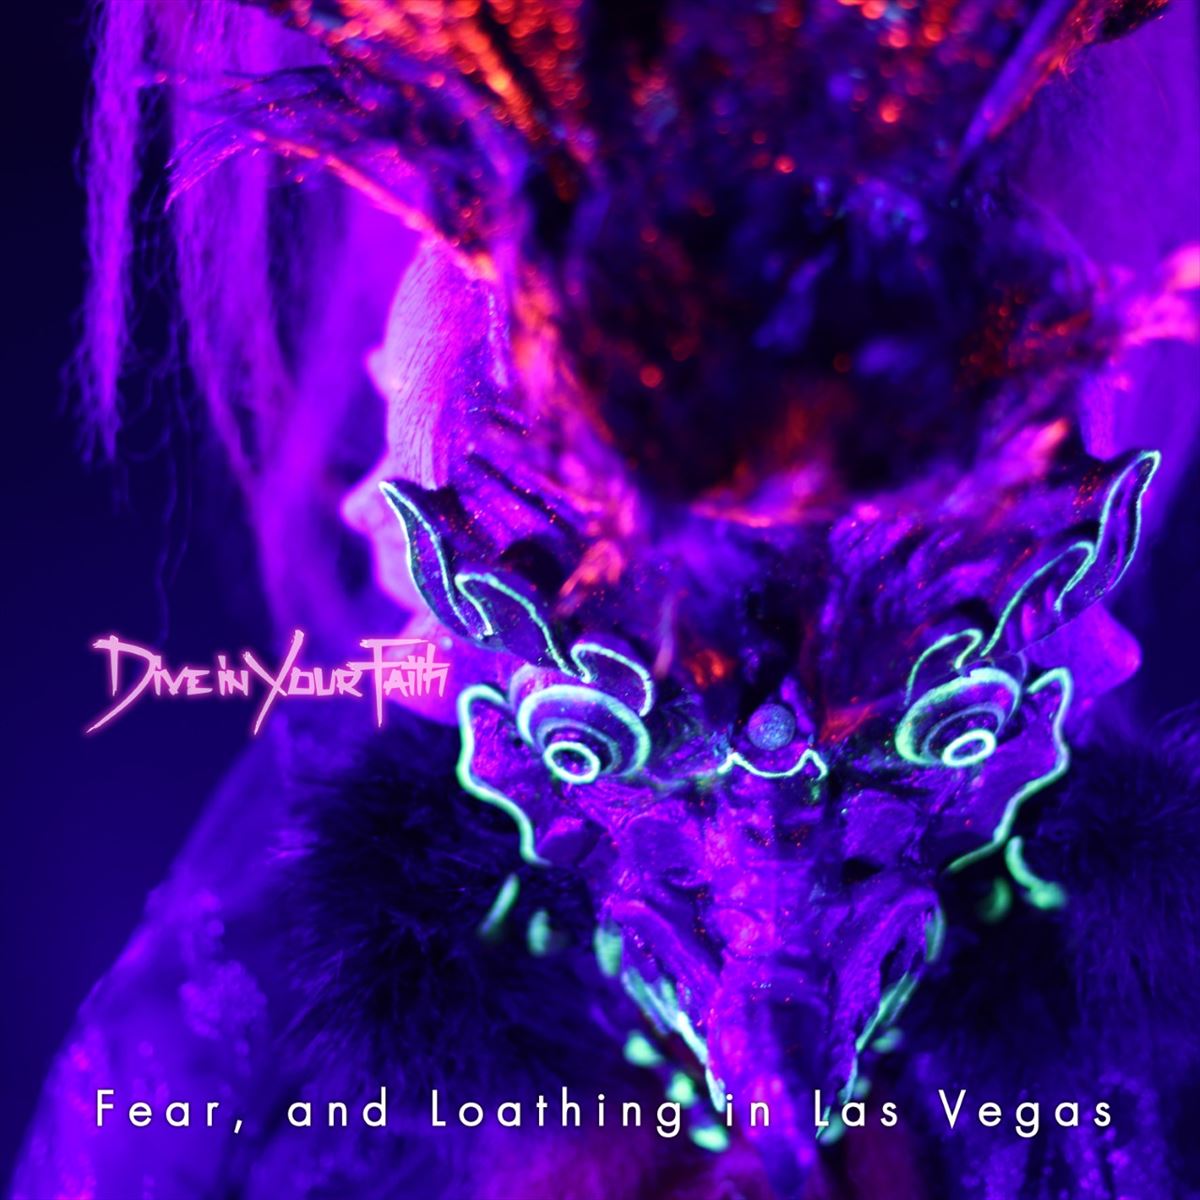 Fear, and Loathing in Las Vegas「Dive in Your Faith」